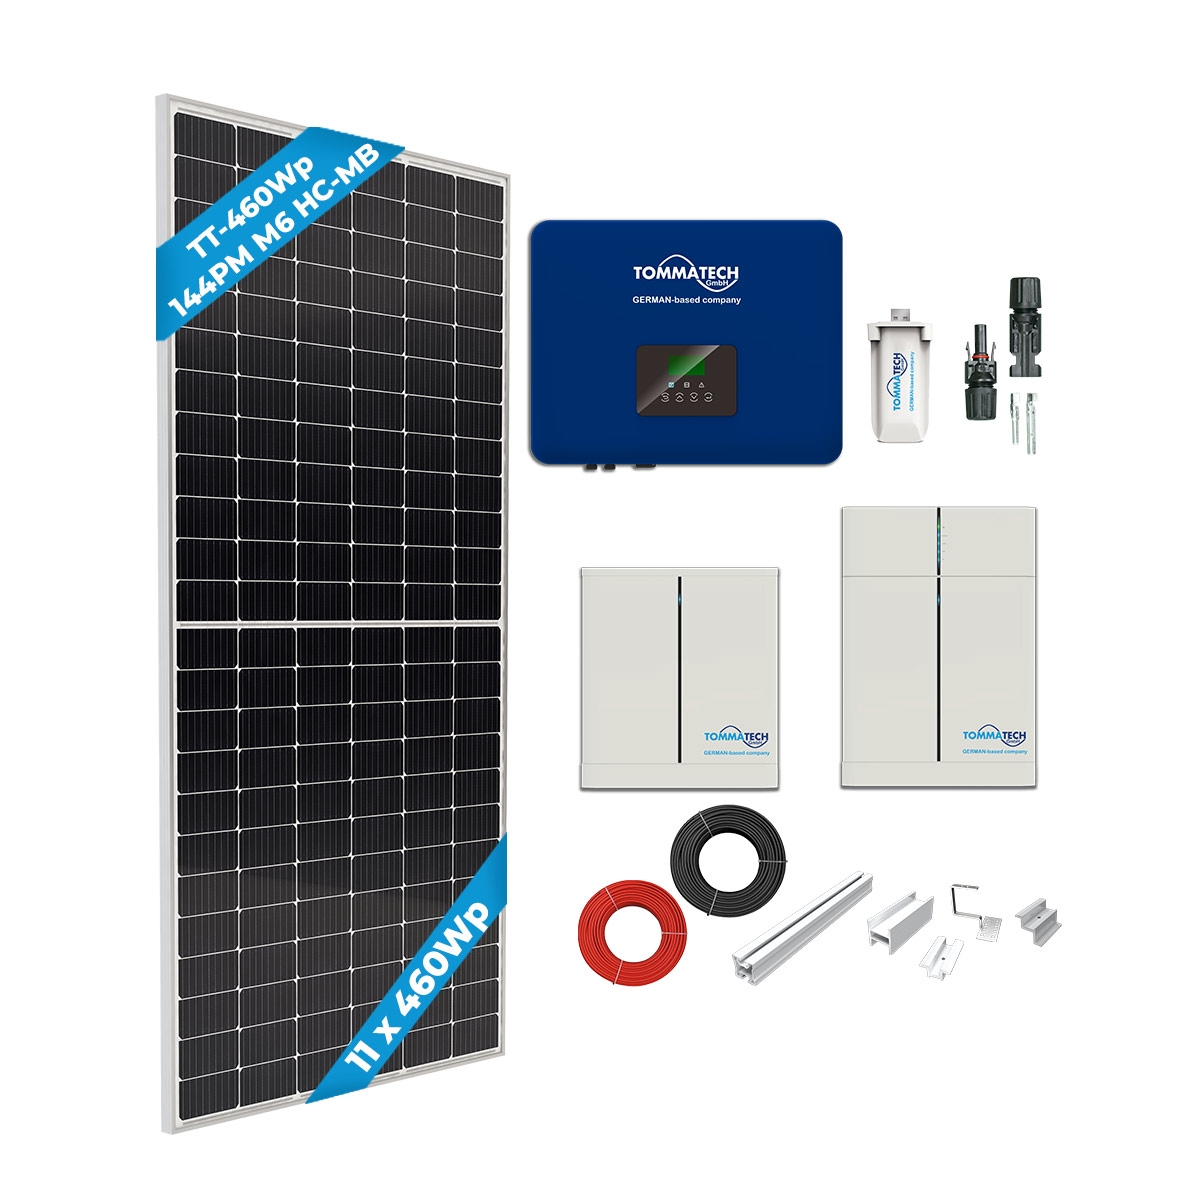 TommaTech 5kWe Tile Roof Three Phase Hybrid Solar Package